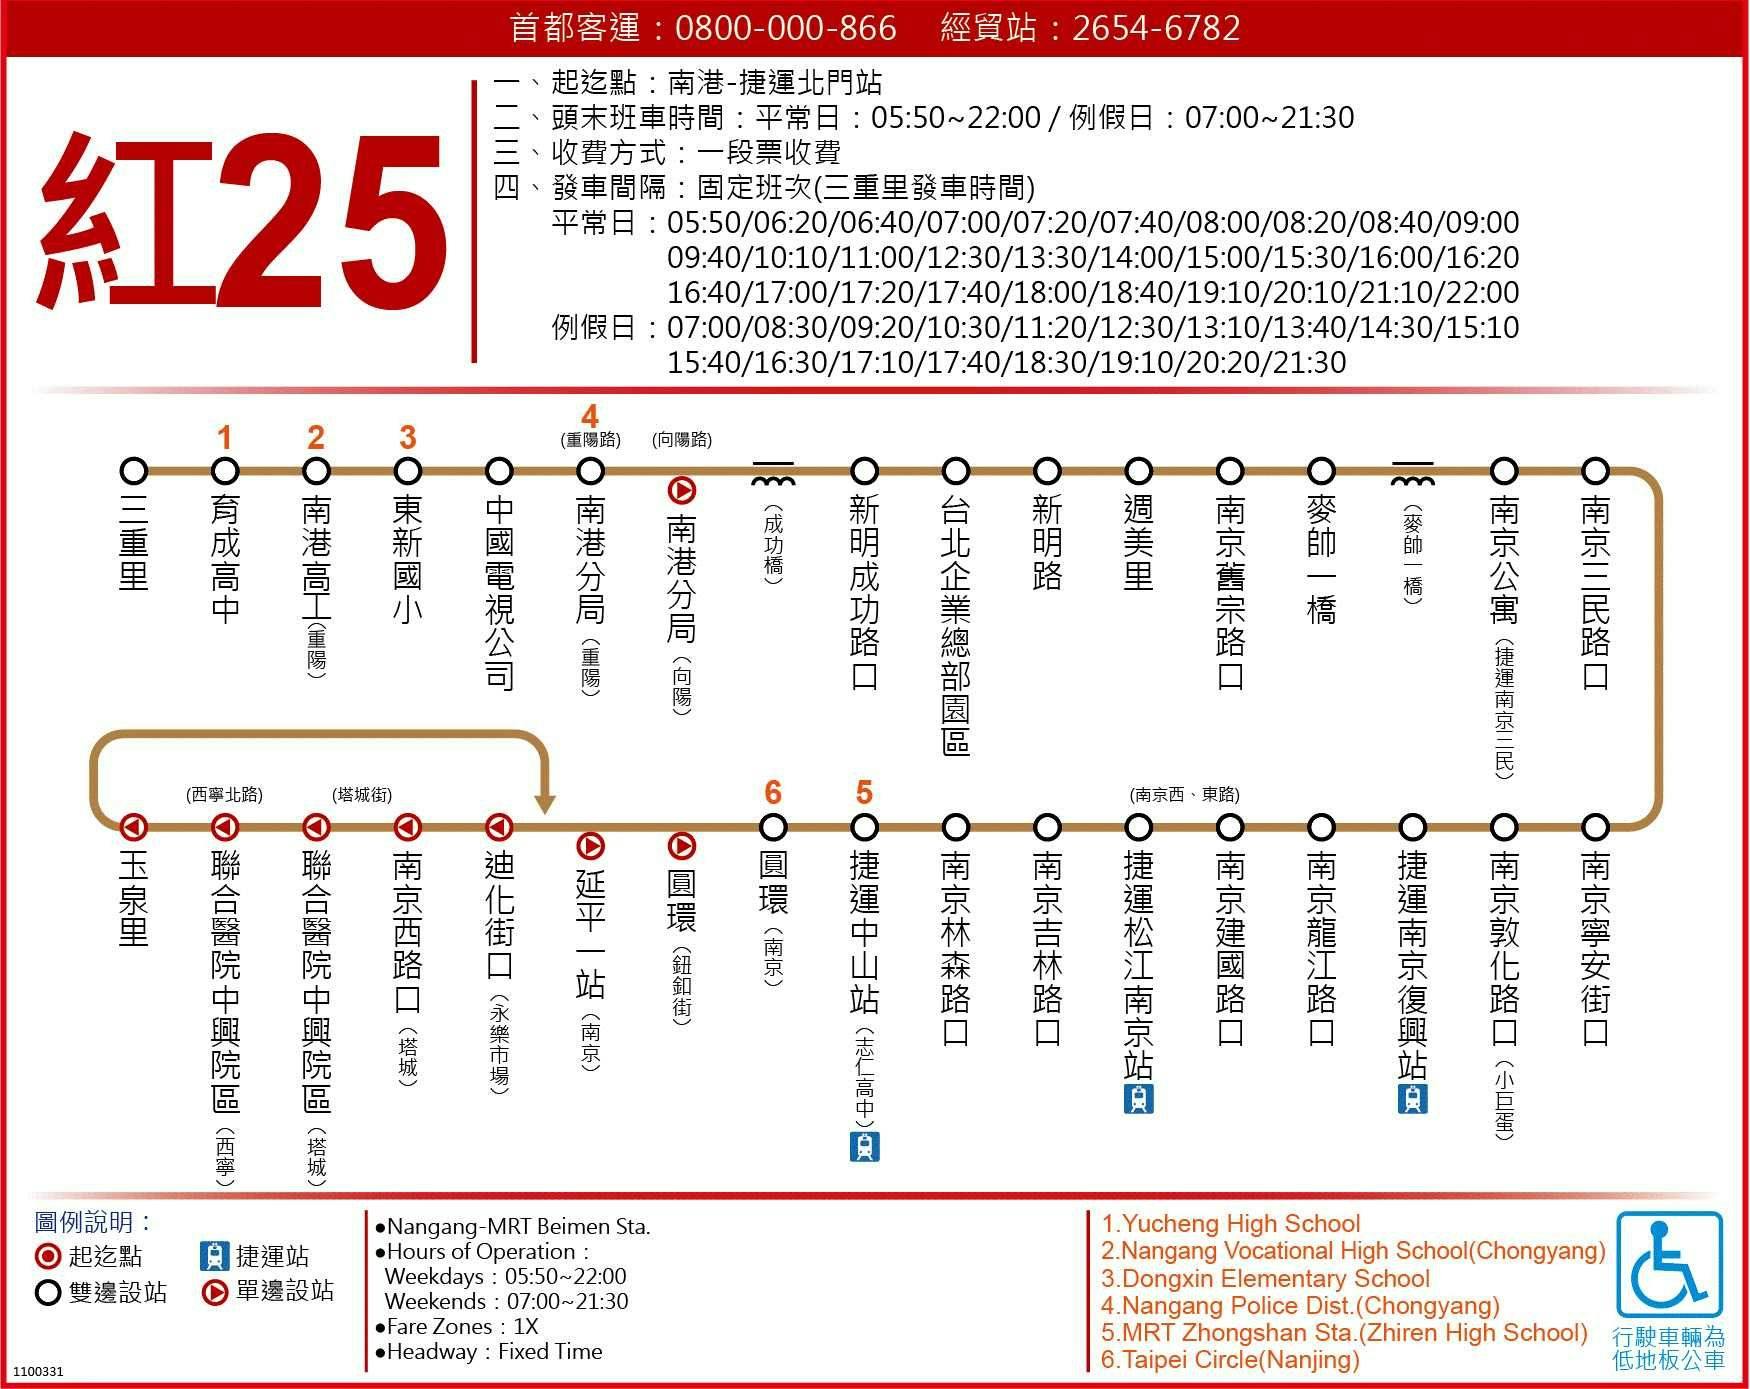 R25Route Map-台北市 Bus